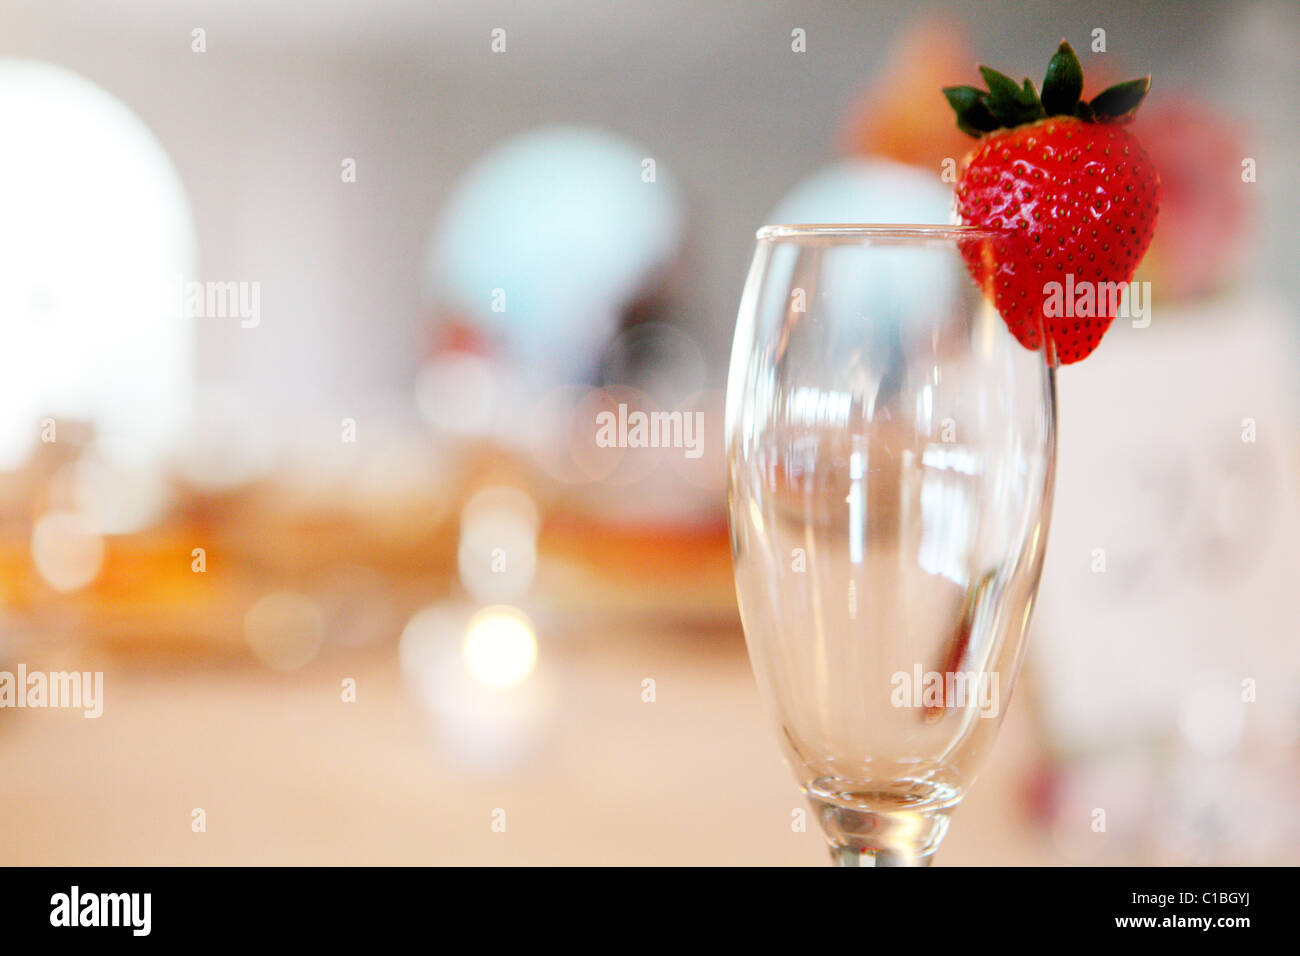 CHAMPAGNE GLASS STRAWBERRY DRINK DECOR ALCOHOL DRINKING Stock Photo